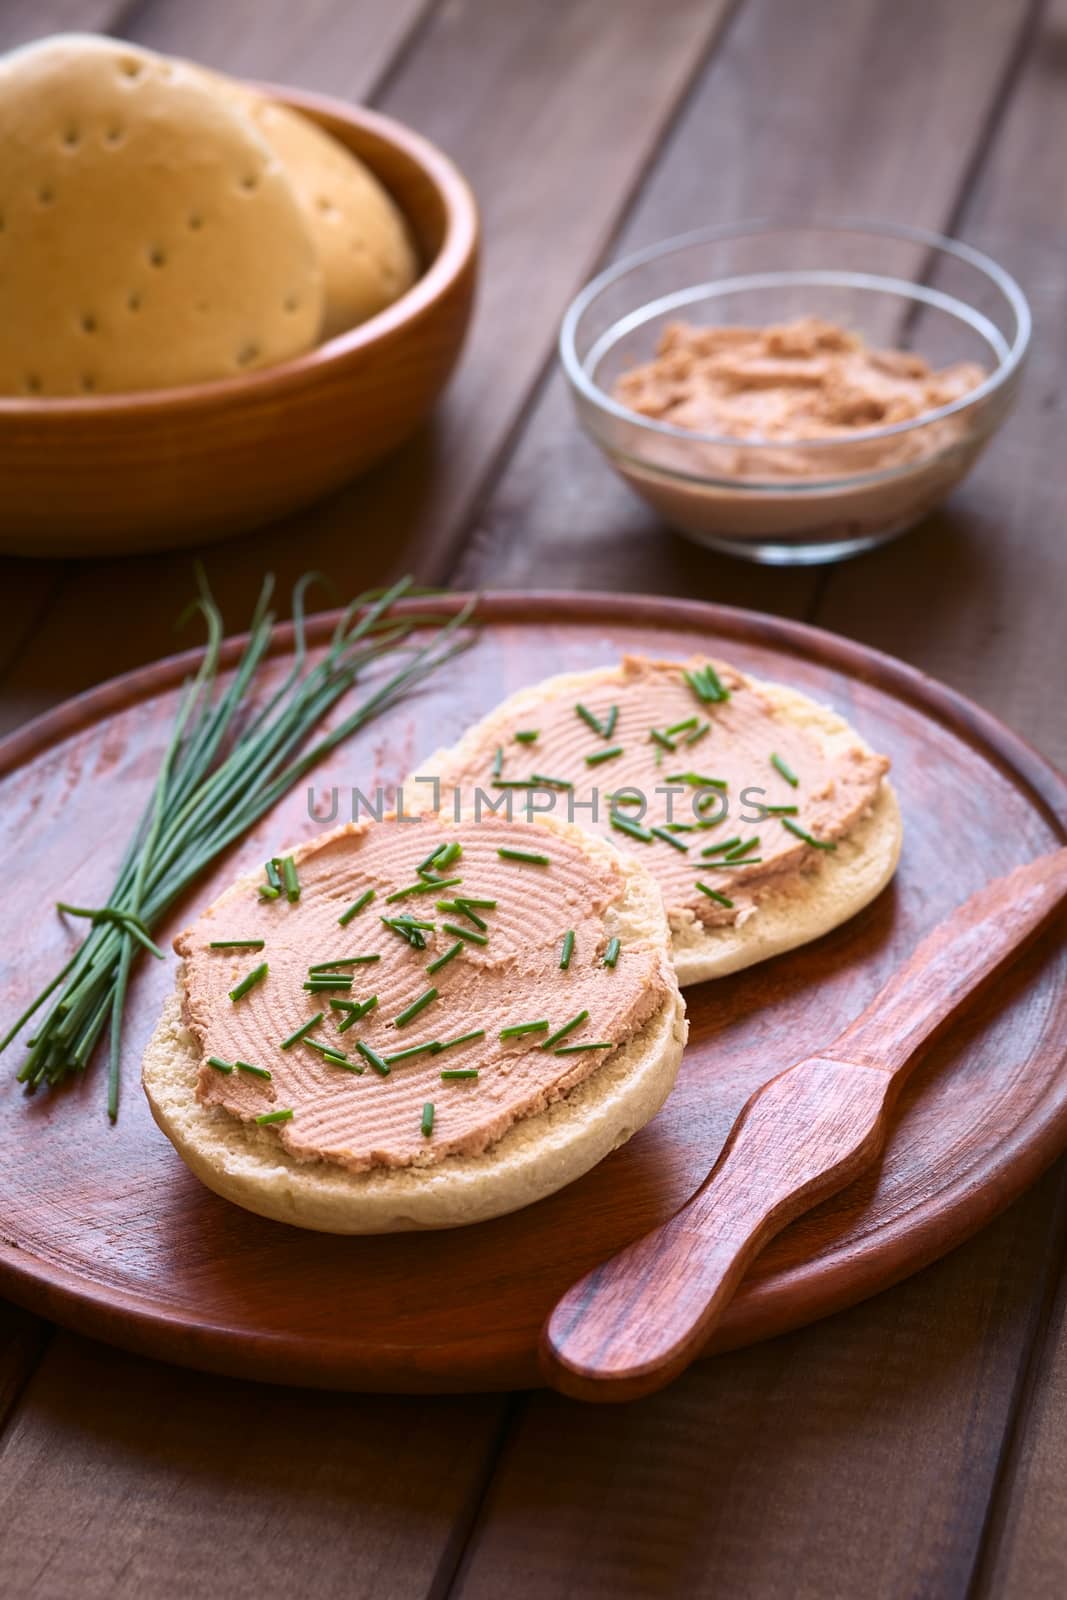 Liverwurst spread on bun with chives photographed with natural light (Selective Focus, Focus one third into the bun)